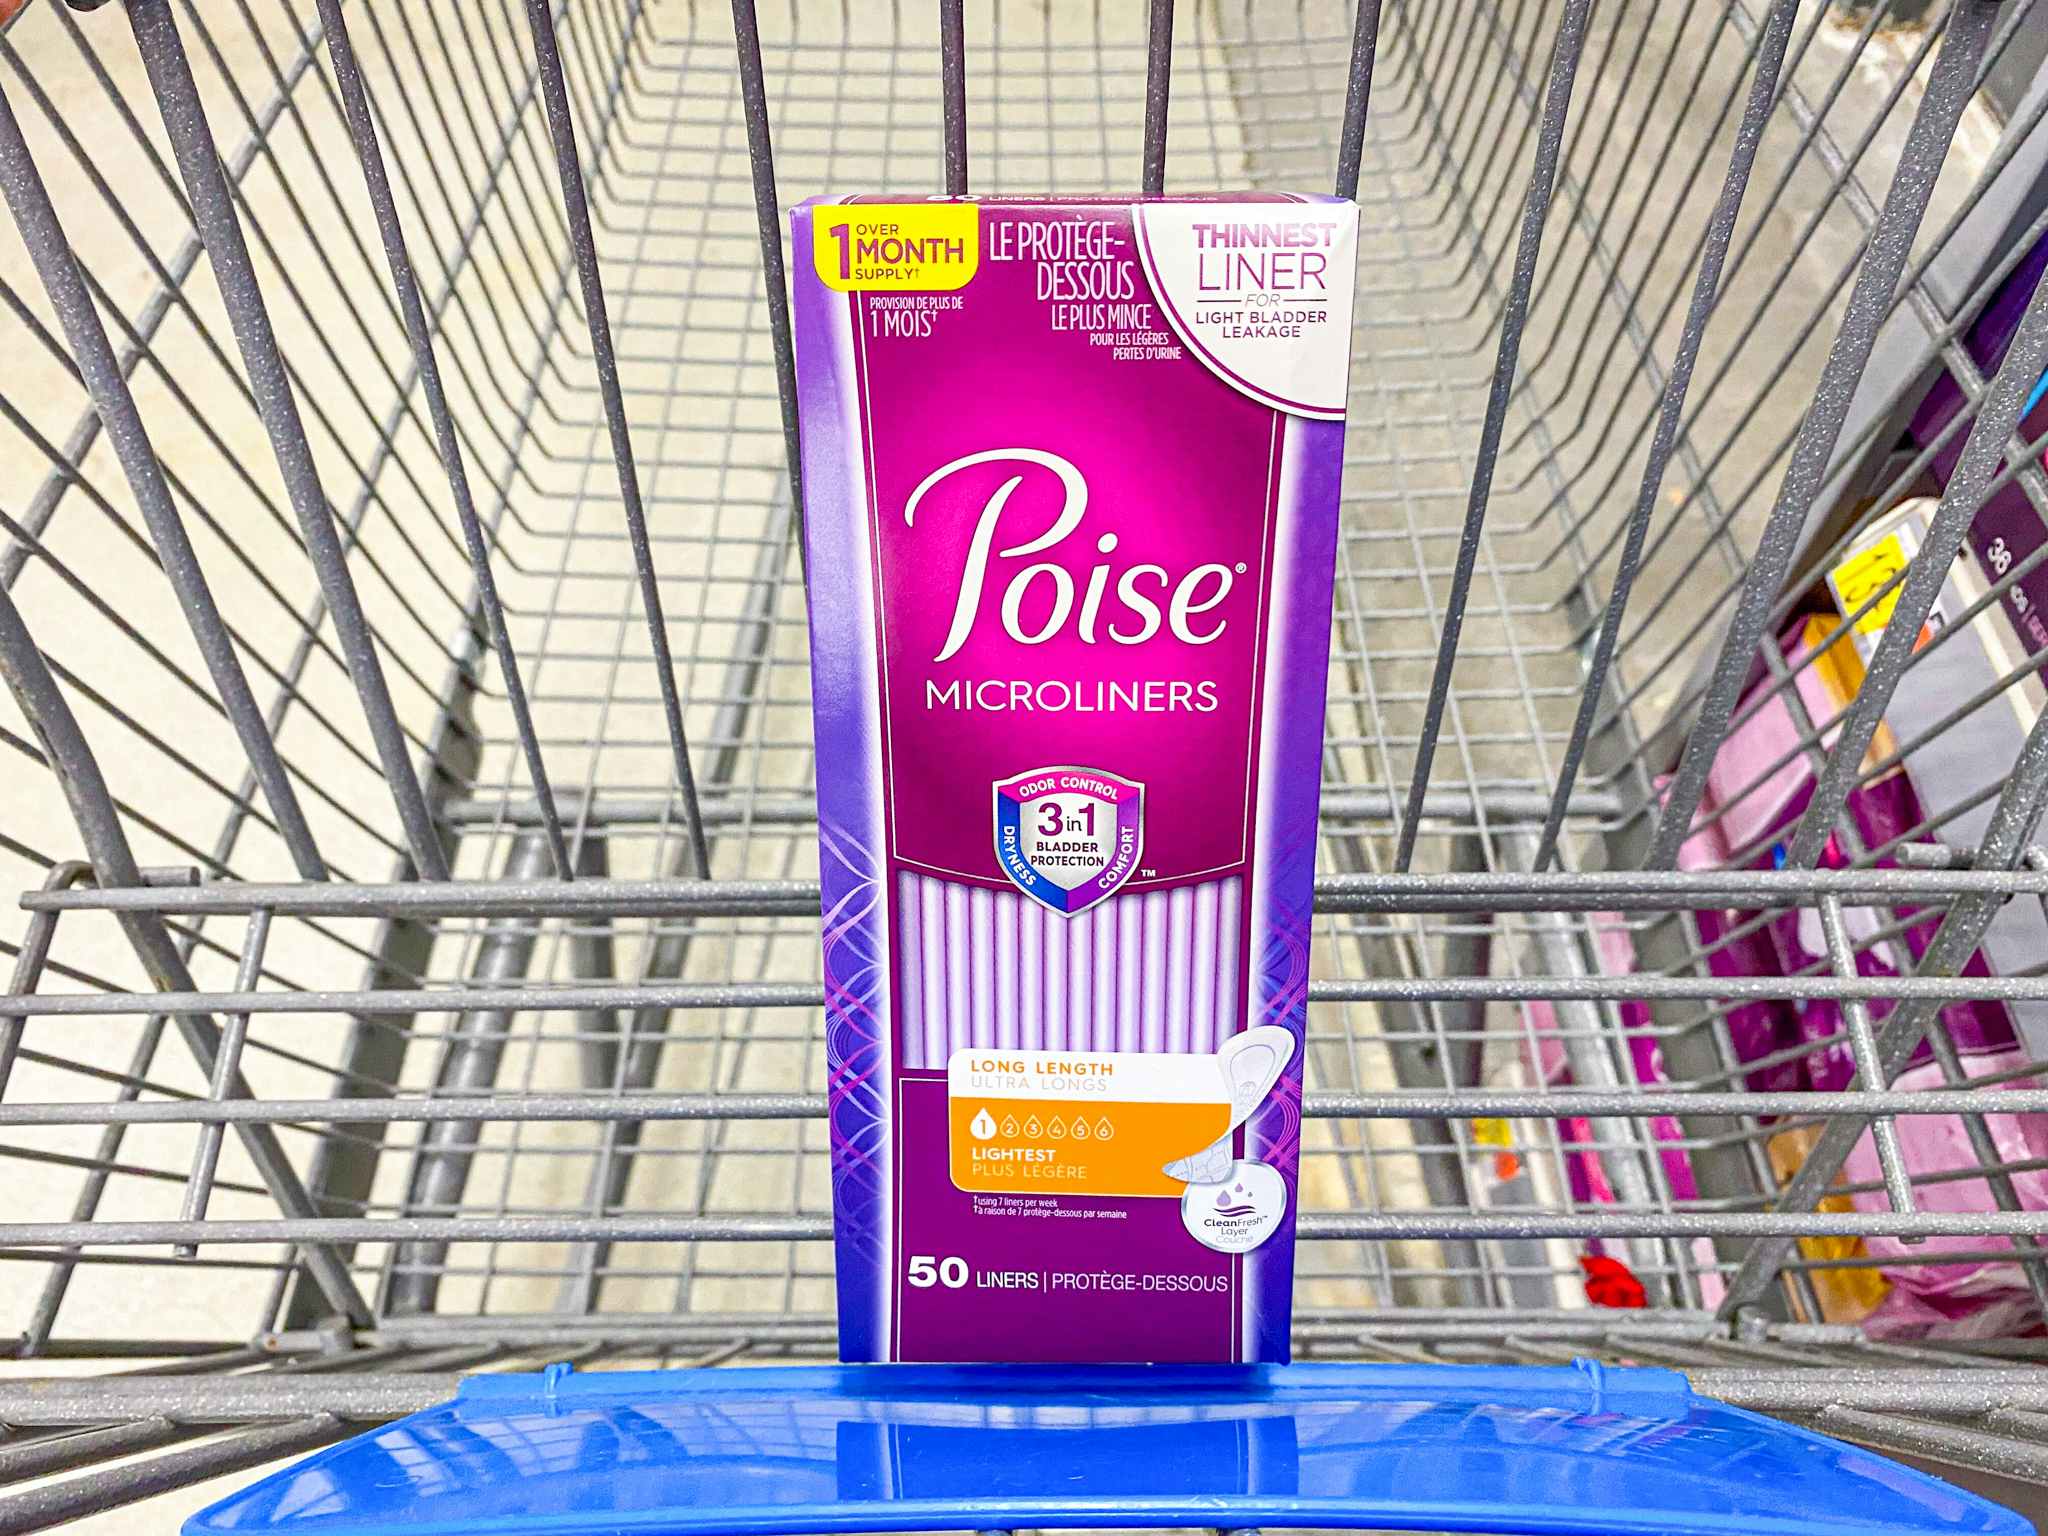 Poise Microliners 50-count package in Walmart shopping cart